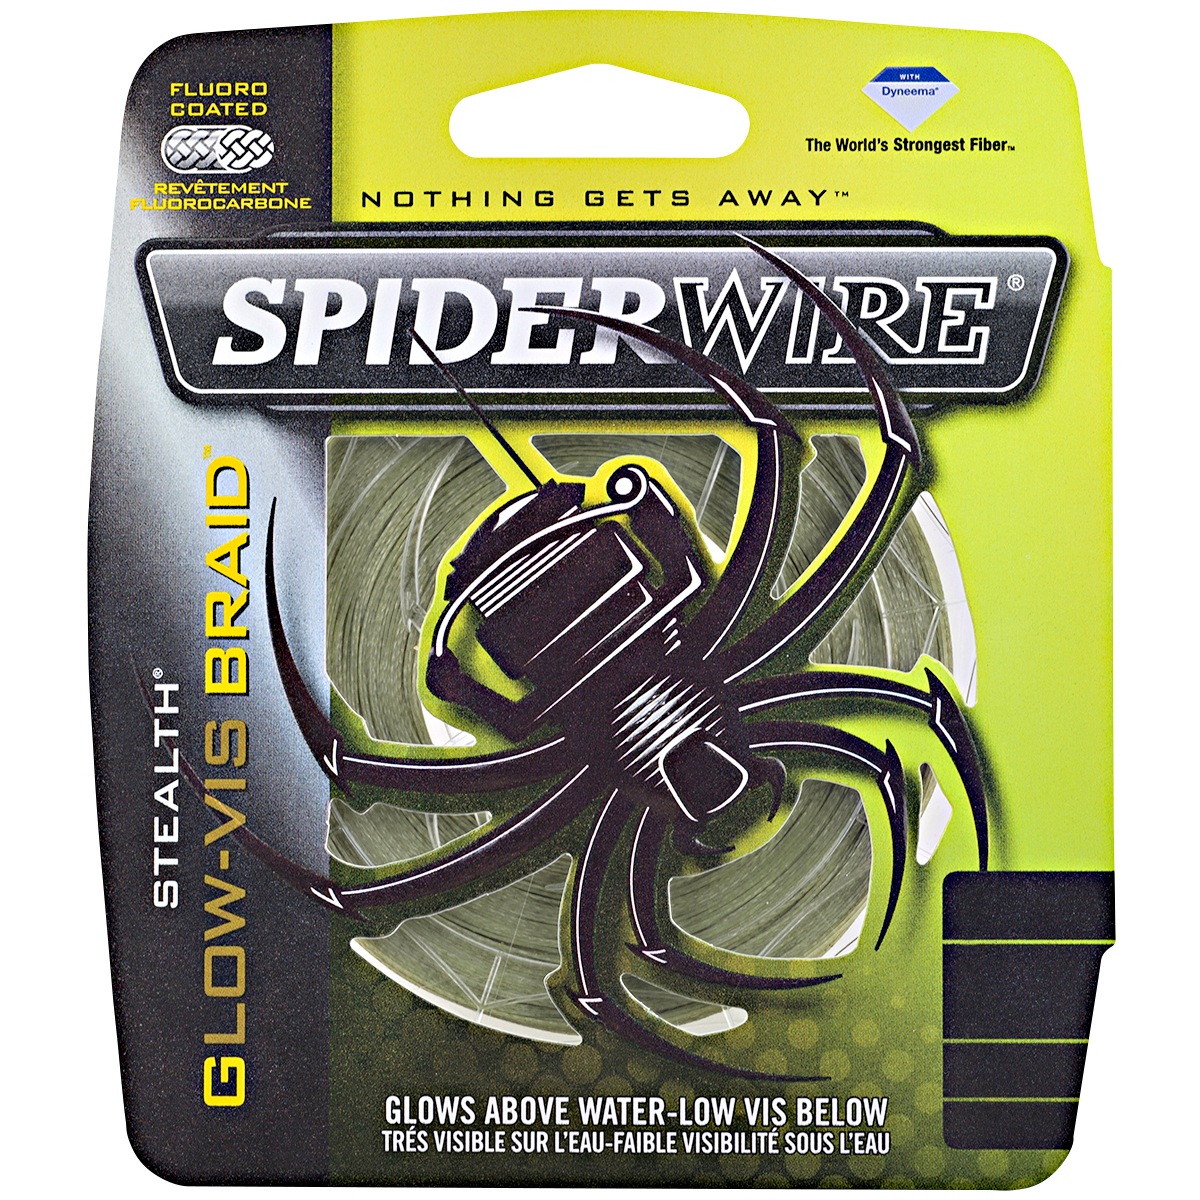 SpiderWire Stealth-Braid Moss Green Enhanced Fishing Line (Select